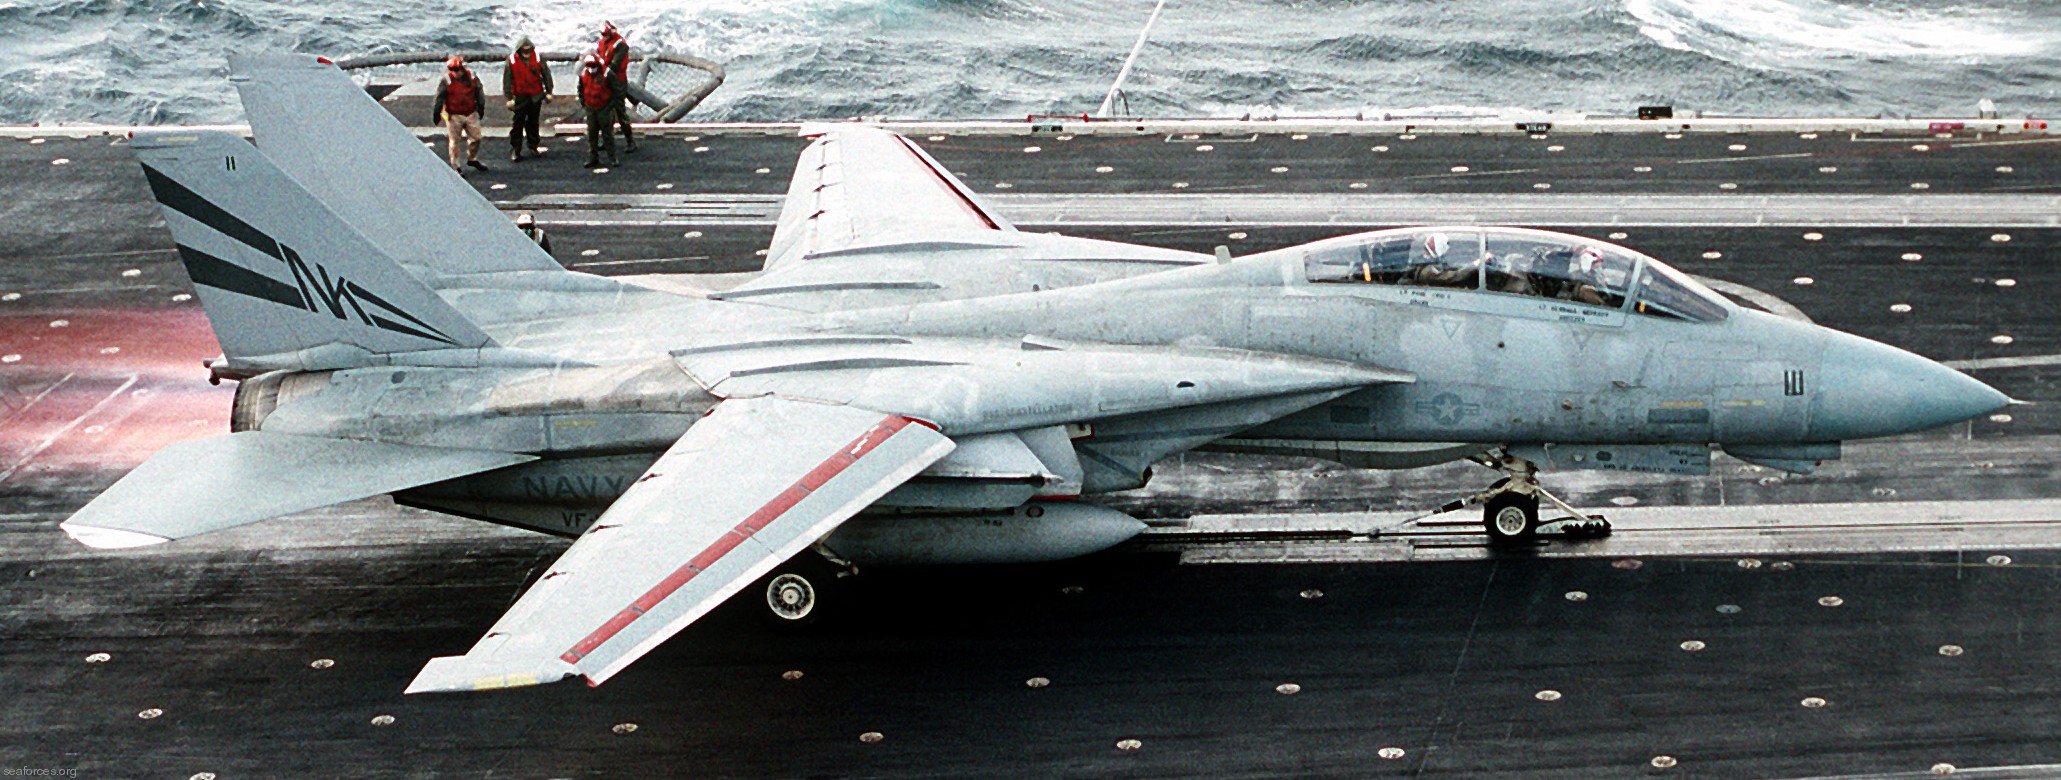 vf-154 black knights fighter squadron us navy f-14a tomcat carrier air wing cvw-14 uss constellation cv-64